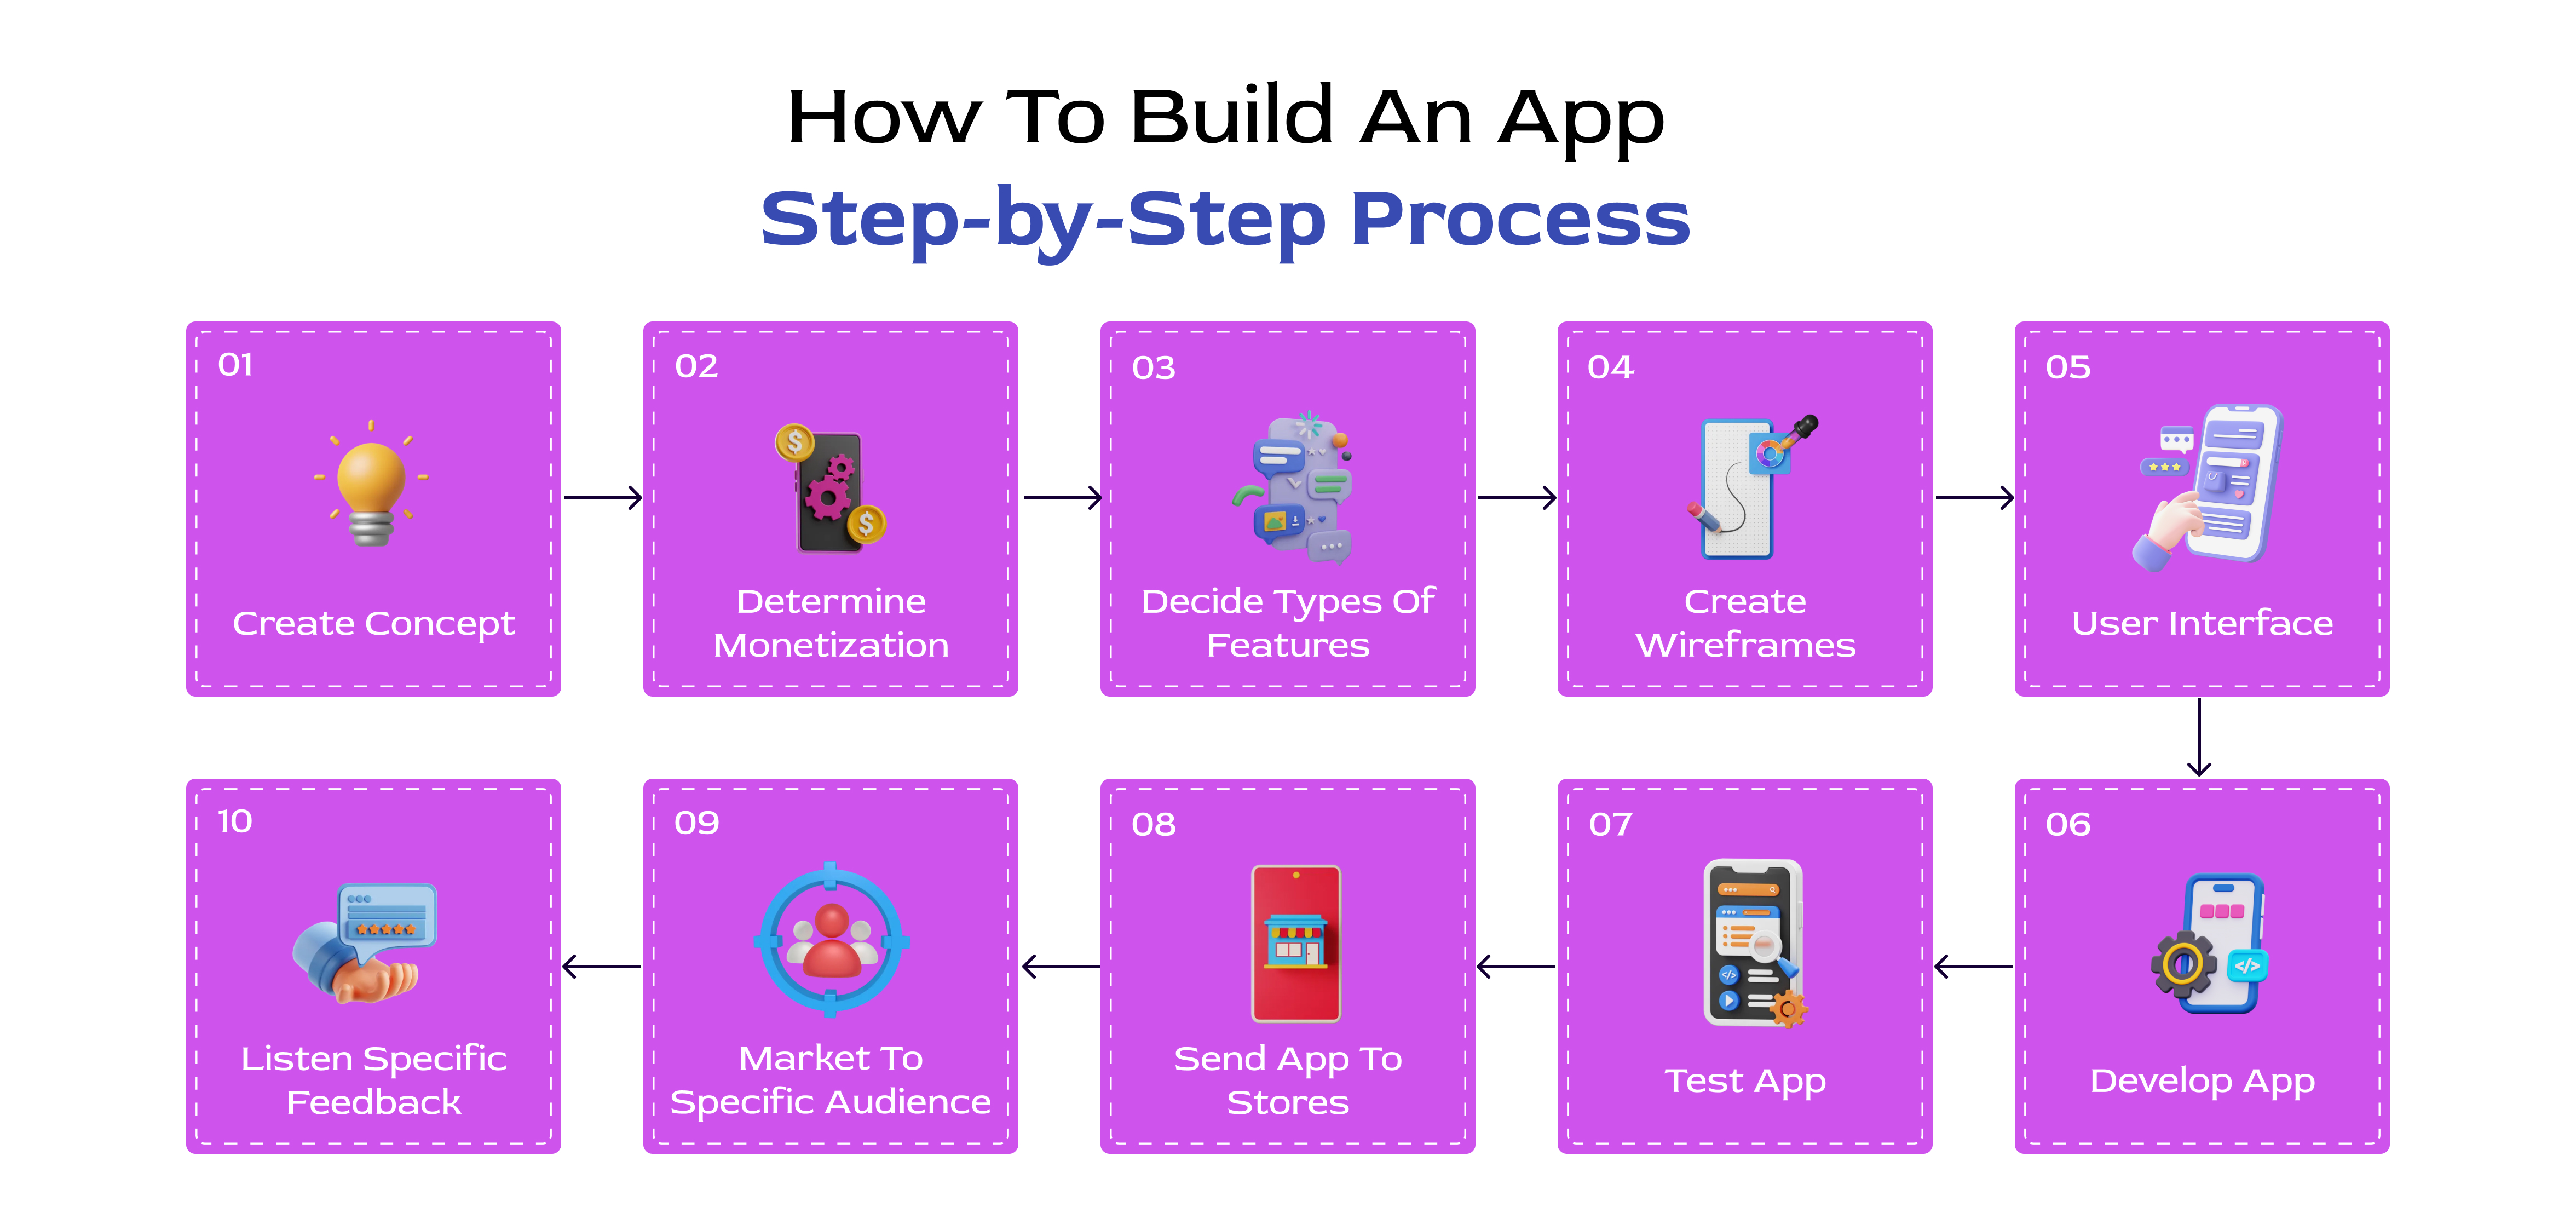 How To Build An App Step-by-Step Process